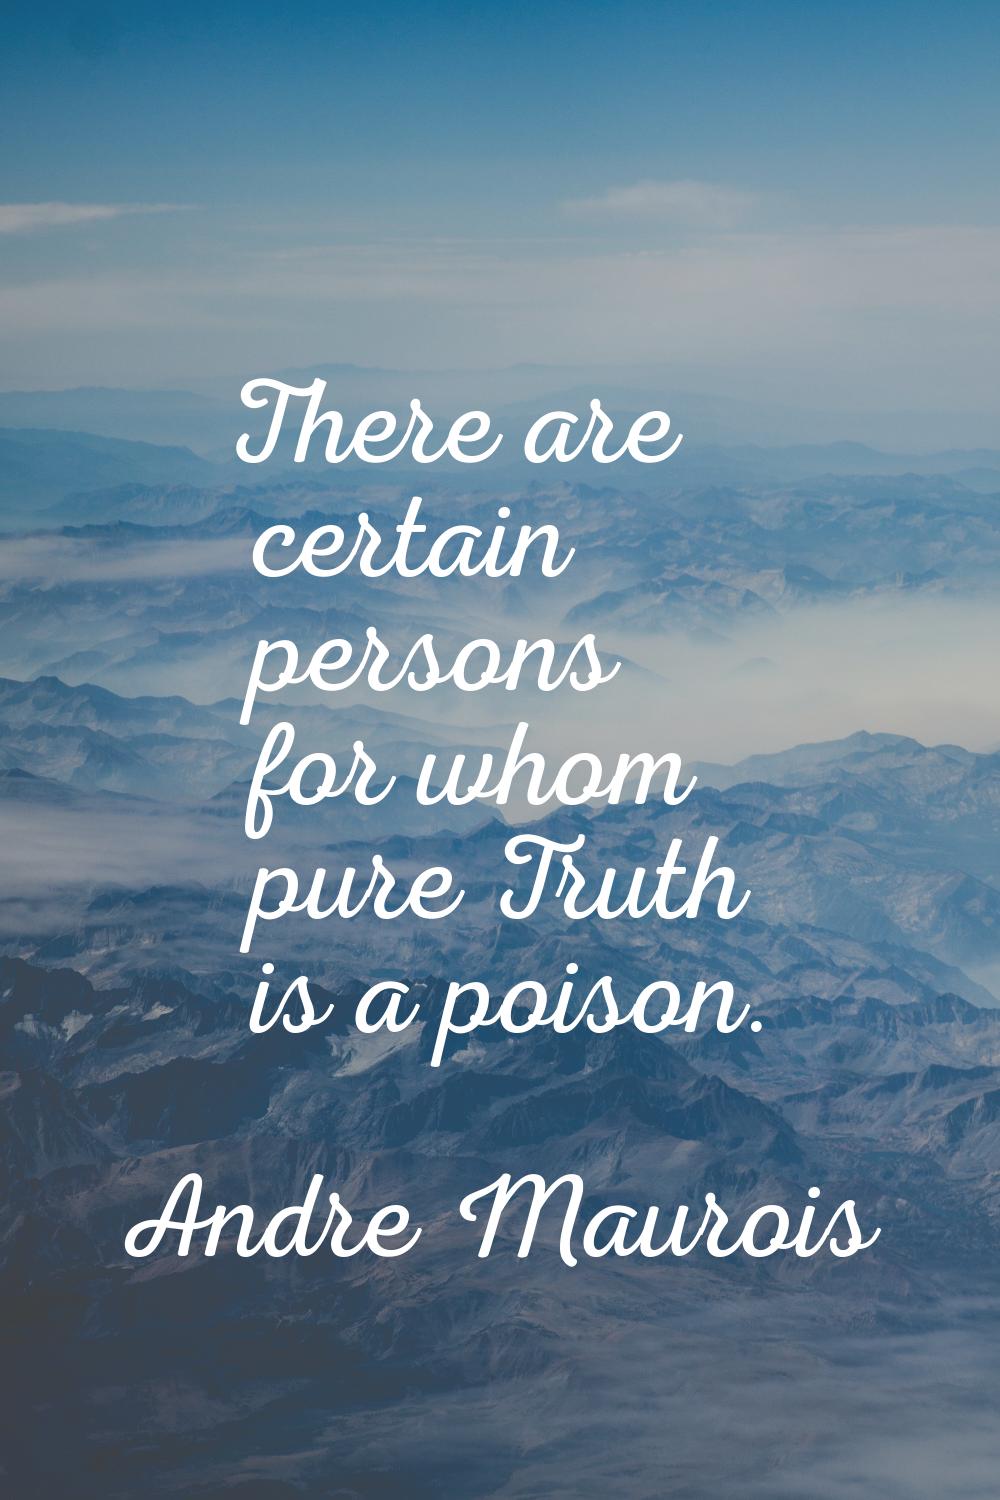 There are certain persons for whom pure Truth is a poison.